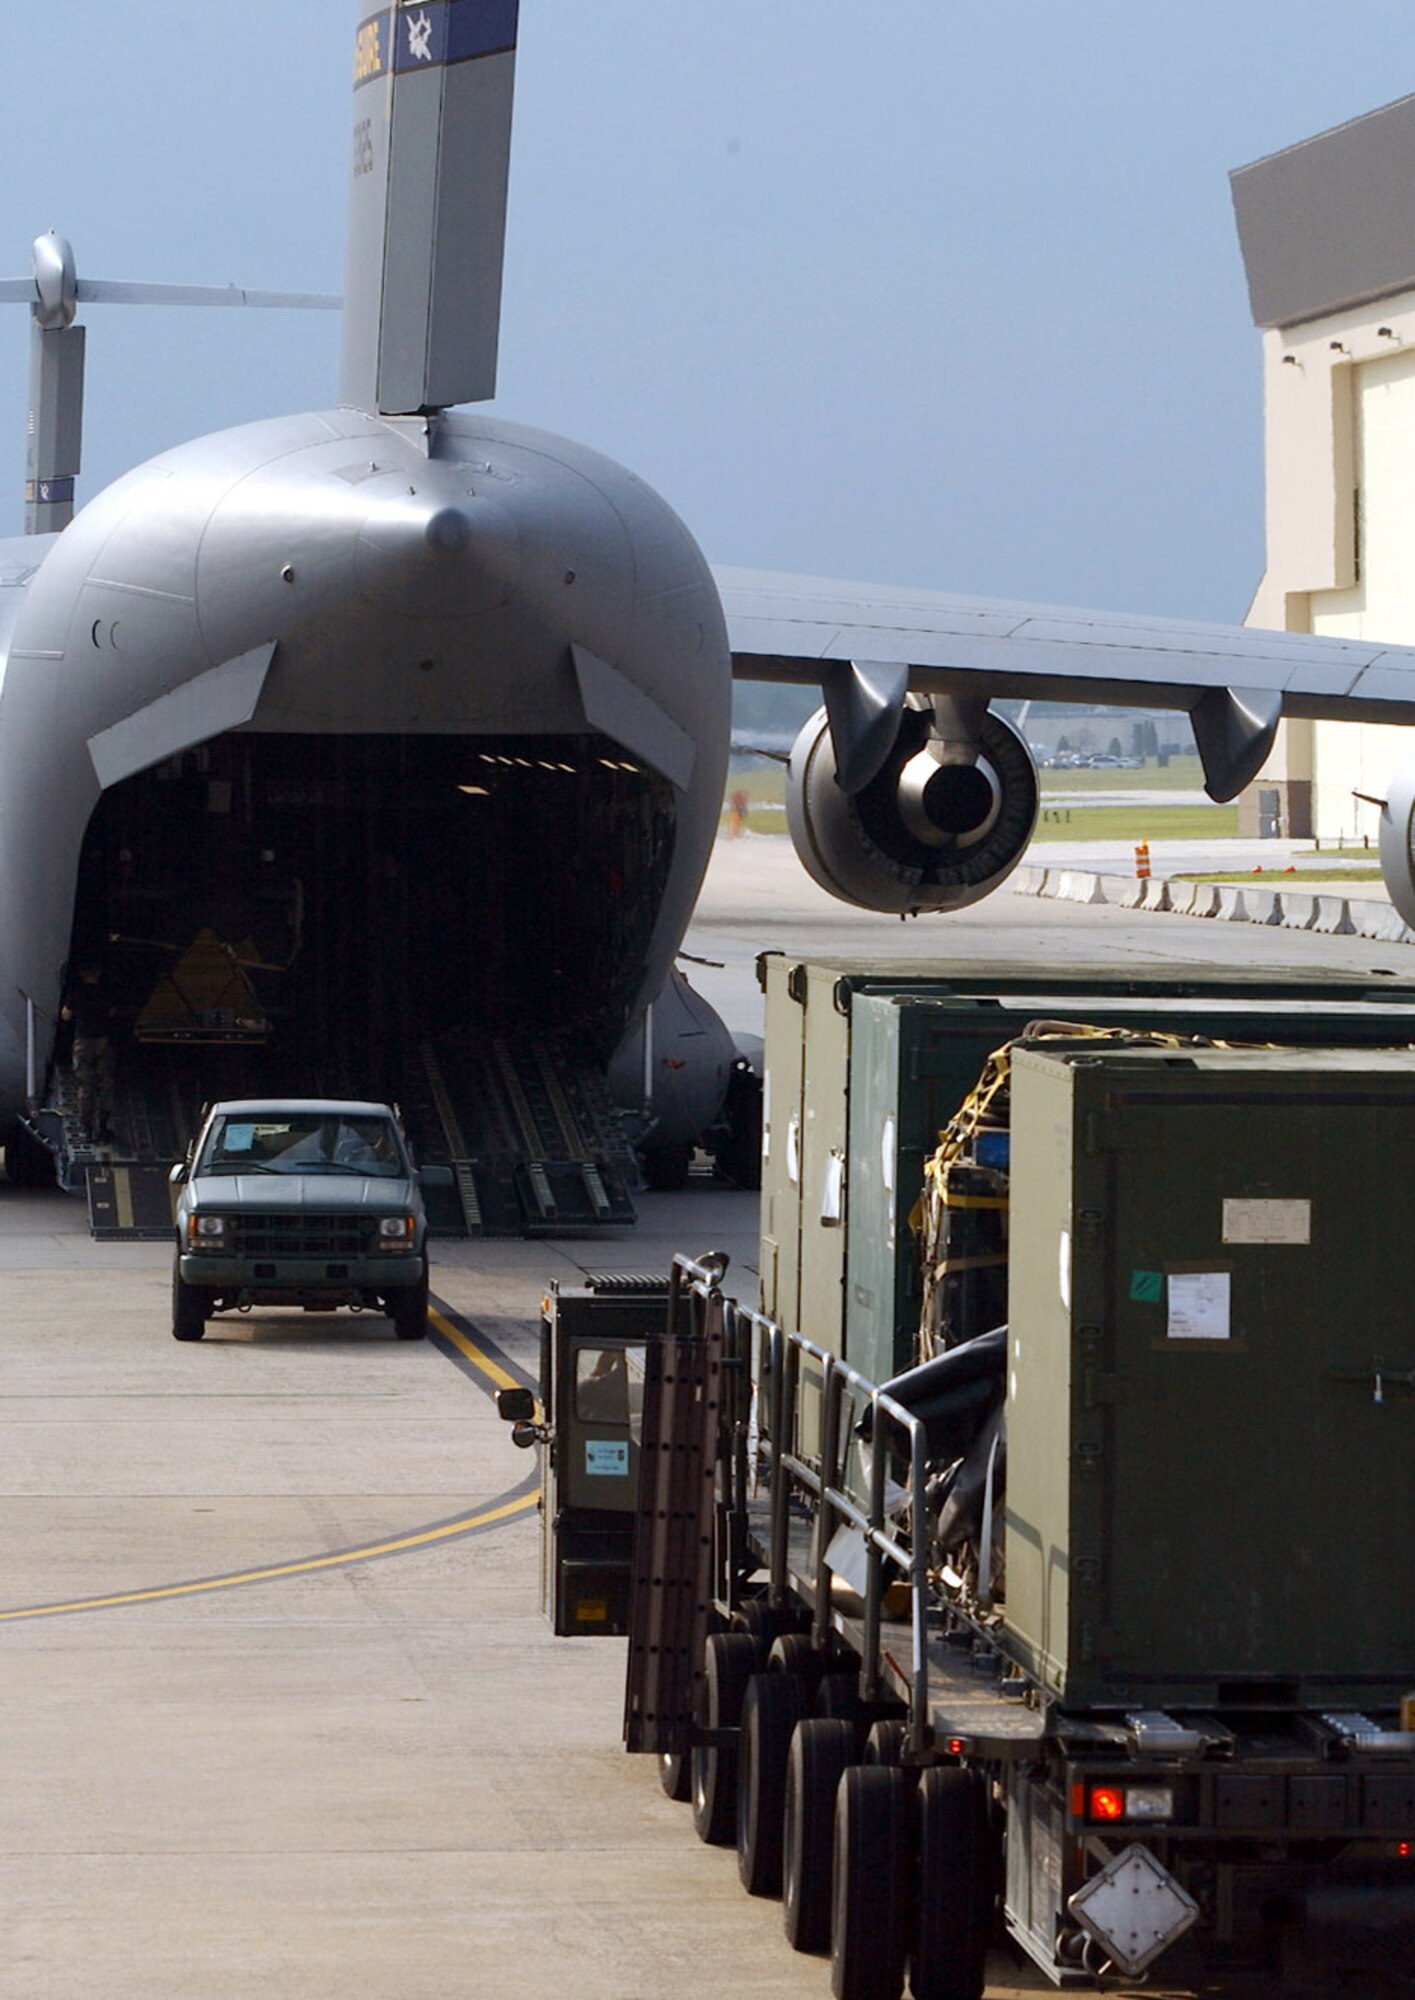 MCGUIRE AIR FORCE BASE, N.J. -- Airmen with the 305th Aerial Port Squadron here load equipment onto a C-17 Globemaster III headed for the New Orleans airport Aug. 31 to assist in Hurricane Katrina relief efforts. Twenty-nine Airmen from McGuire's 621st Contingency Response Wing and 110,000 pounds of equipment departed here for the hurricane-devastated region.  (U.S. Air Force photo by Kenn Mann)